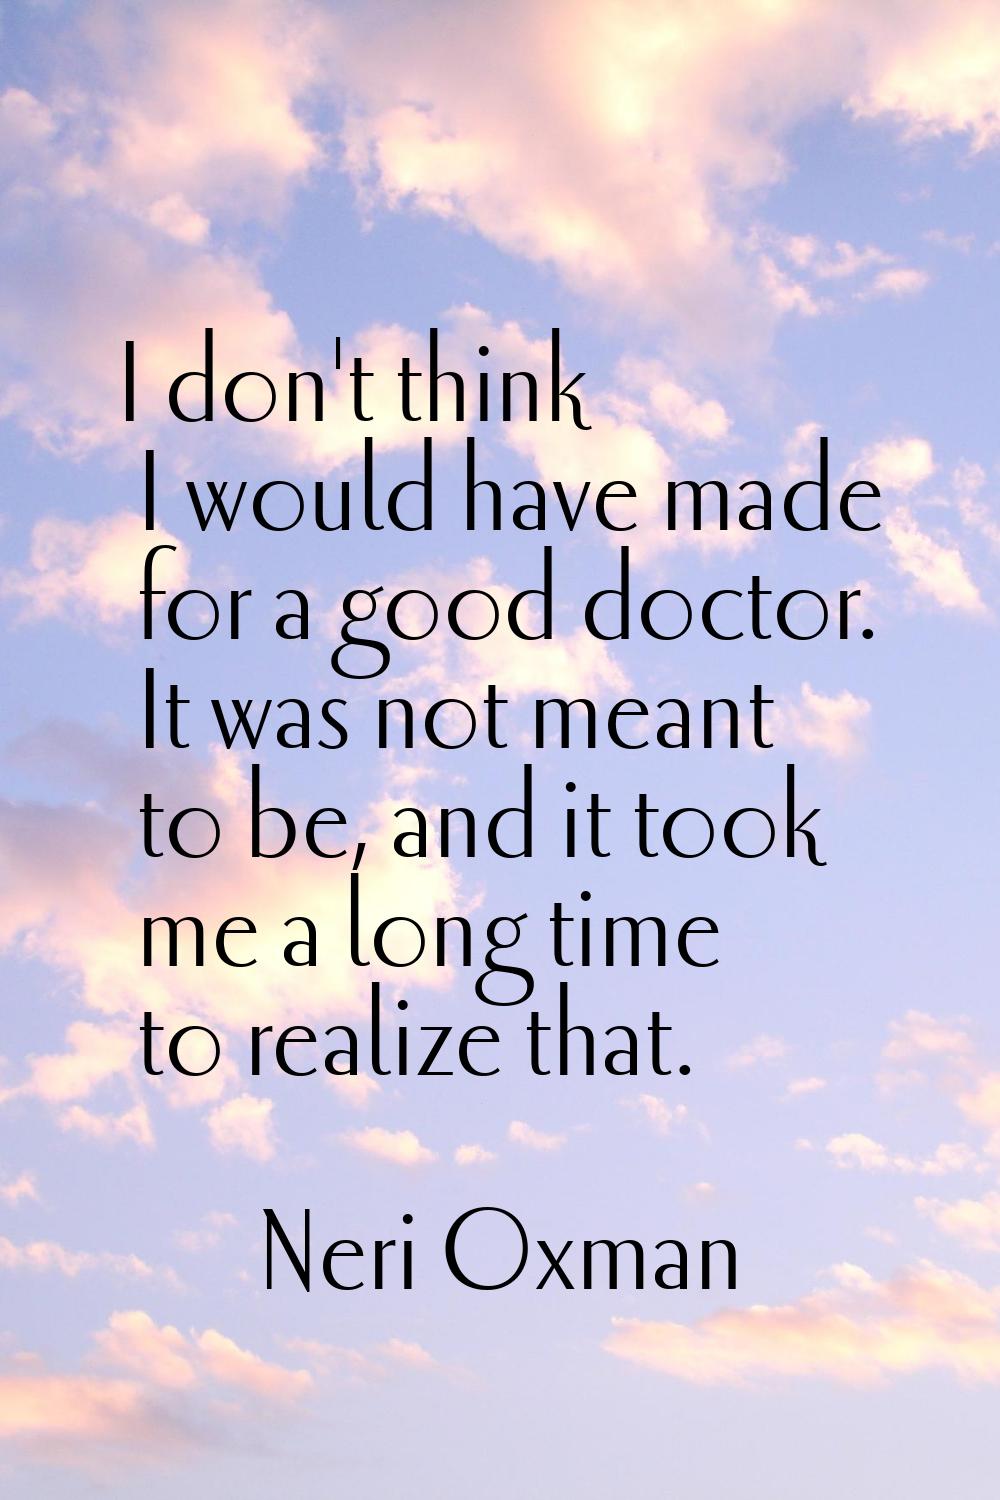 I don't think I would have made for a good doctor. It was not meant to be, and it took me a long ti